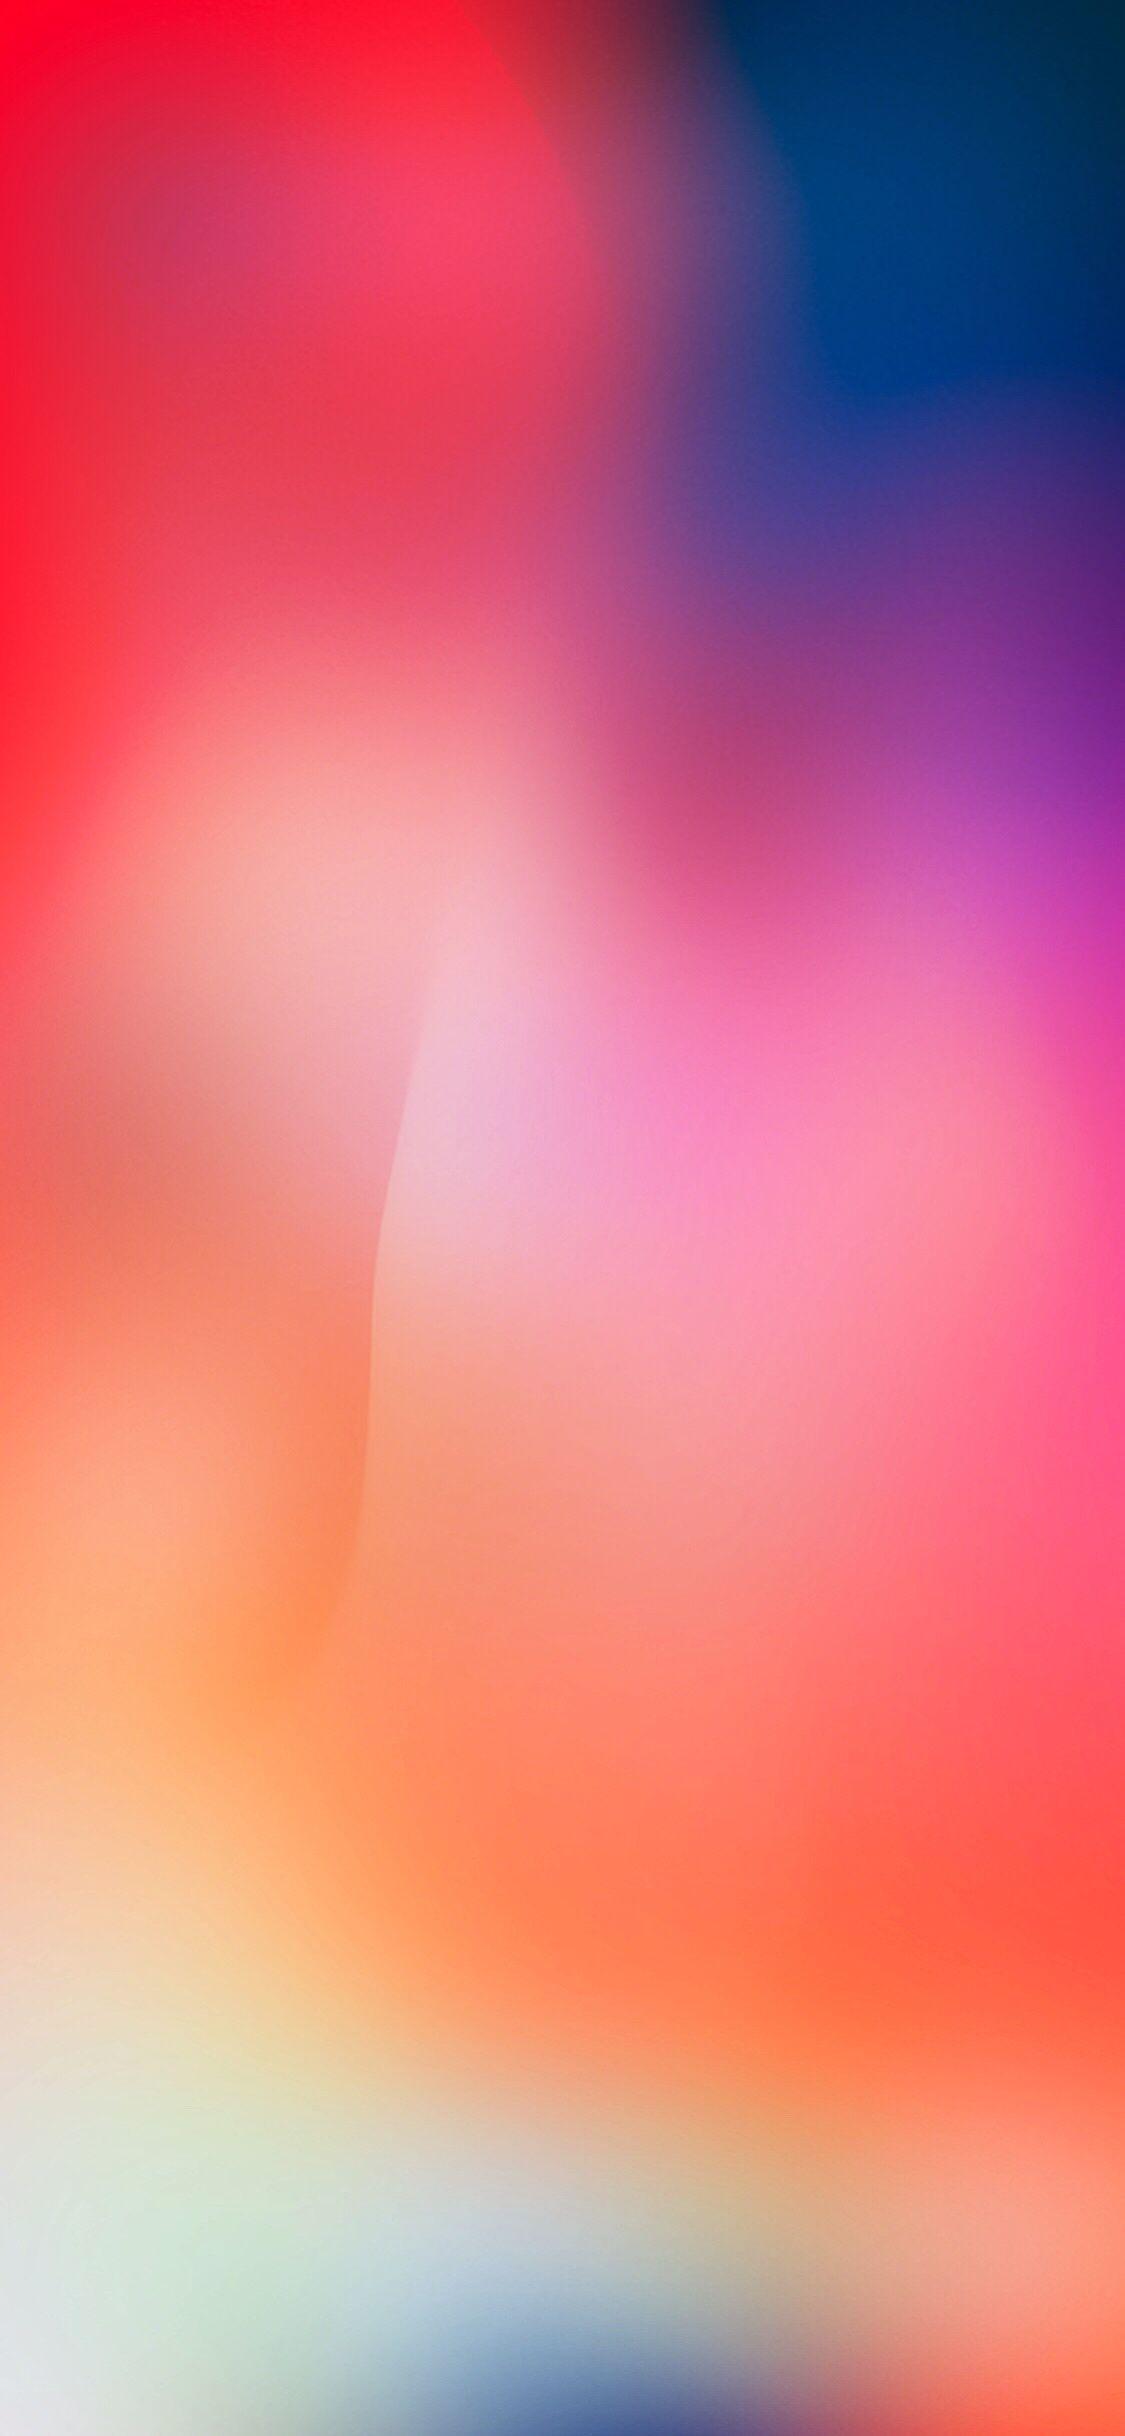 Red, Orange And Blue Wallpapers - Wallpaper Cave